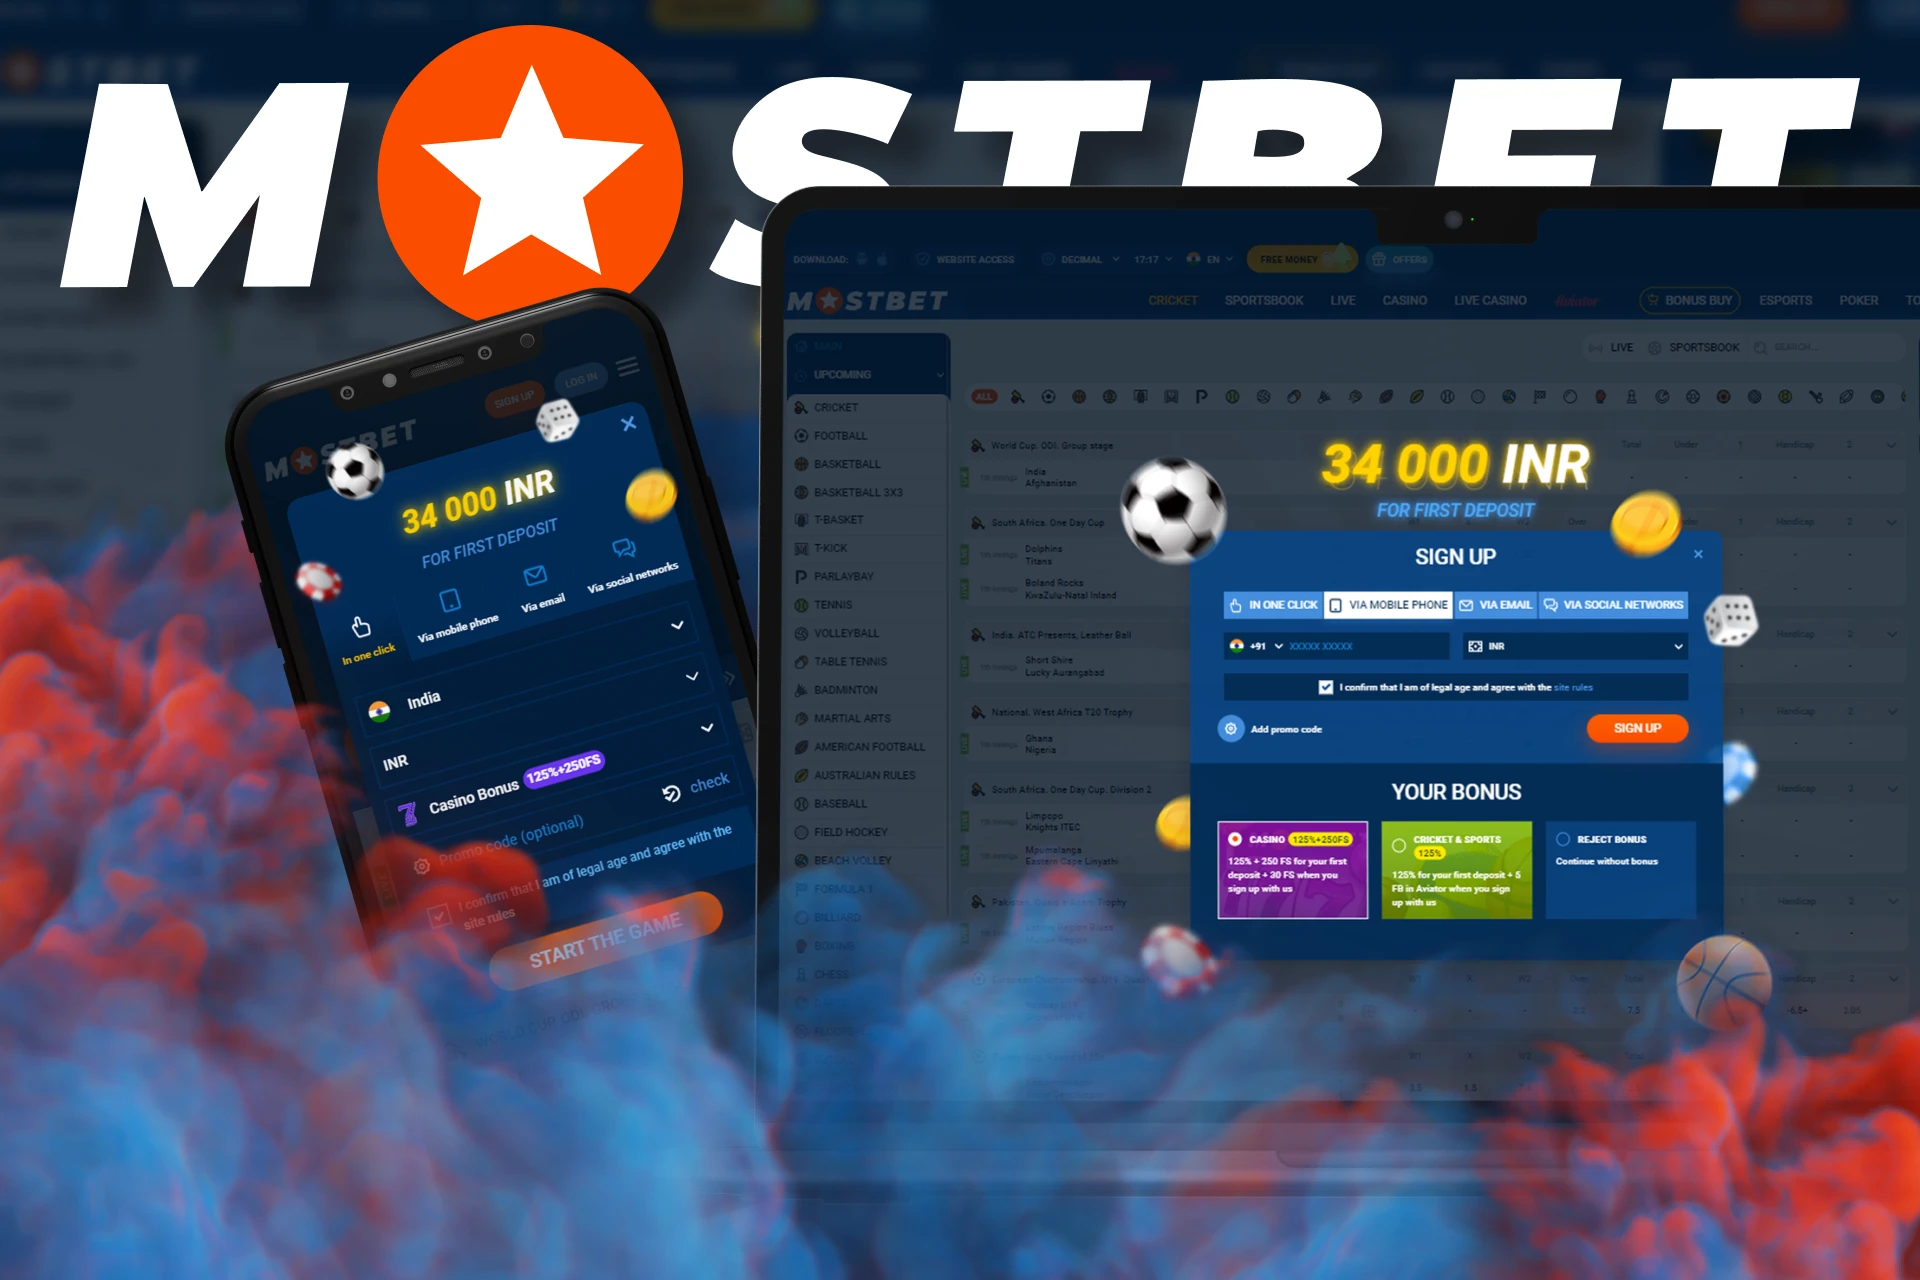 Mostbet mobile application in Germany - download and play: An Incredibly Easy Method That Works For All